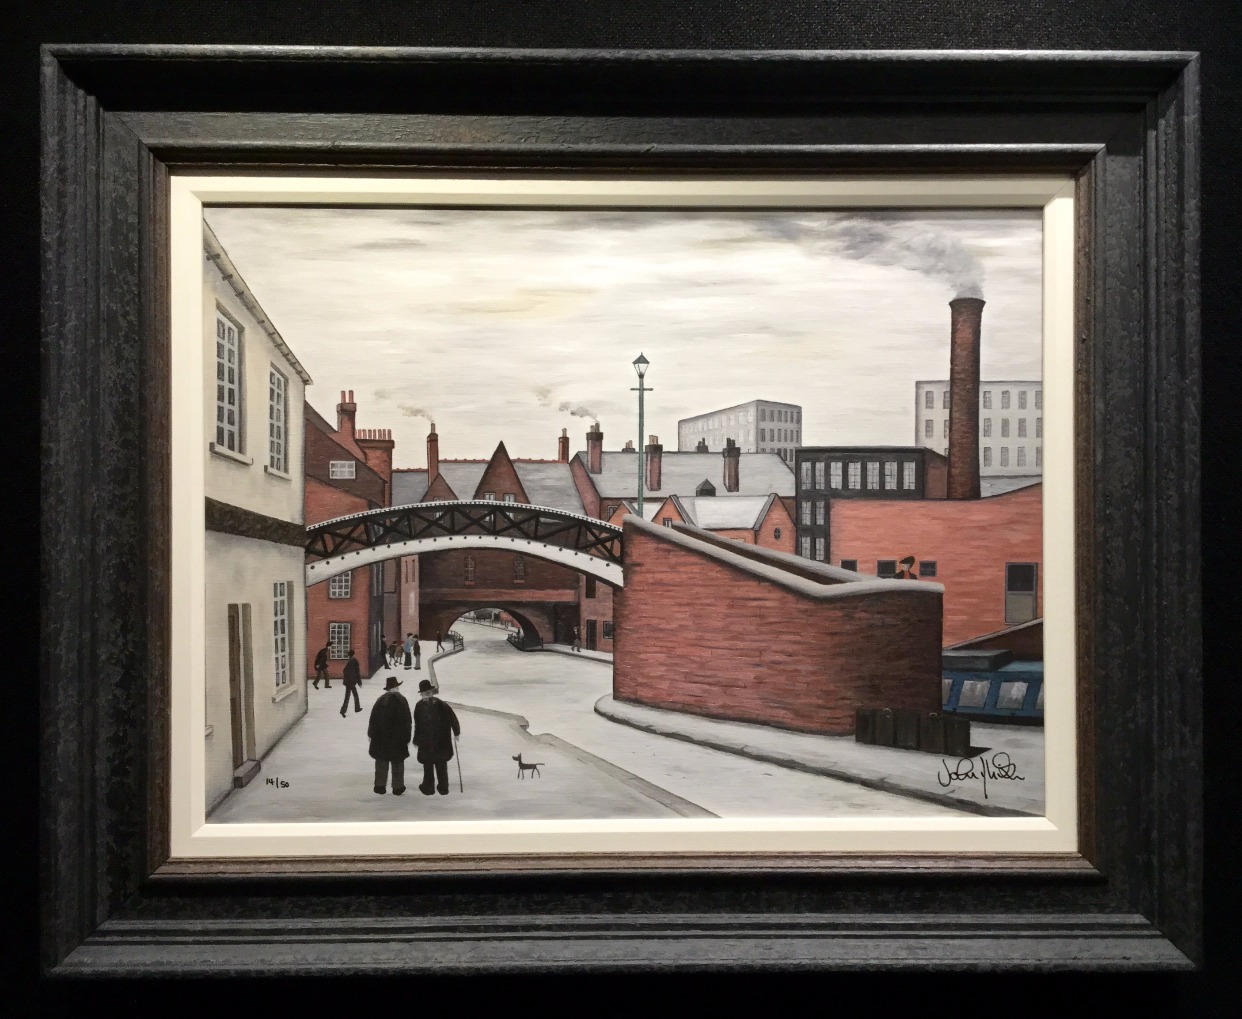 In his Footsteps by John D Wilson, Water | Nostalgic | Lowry | Industrial | Landscape